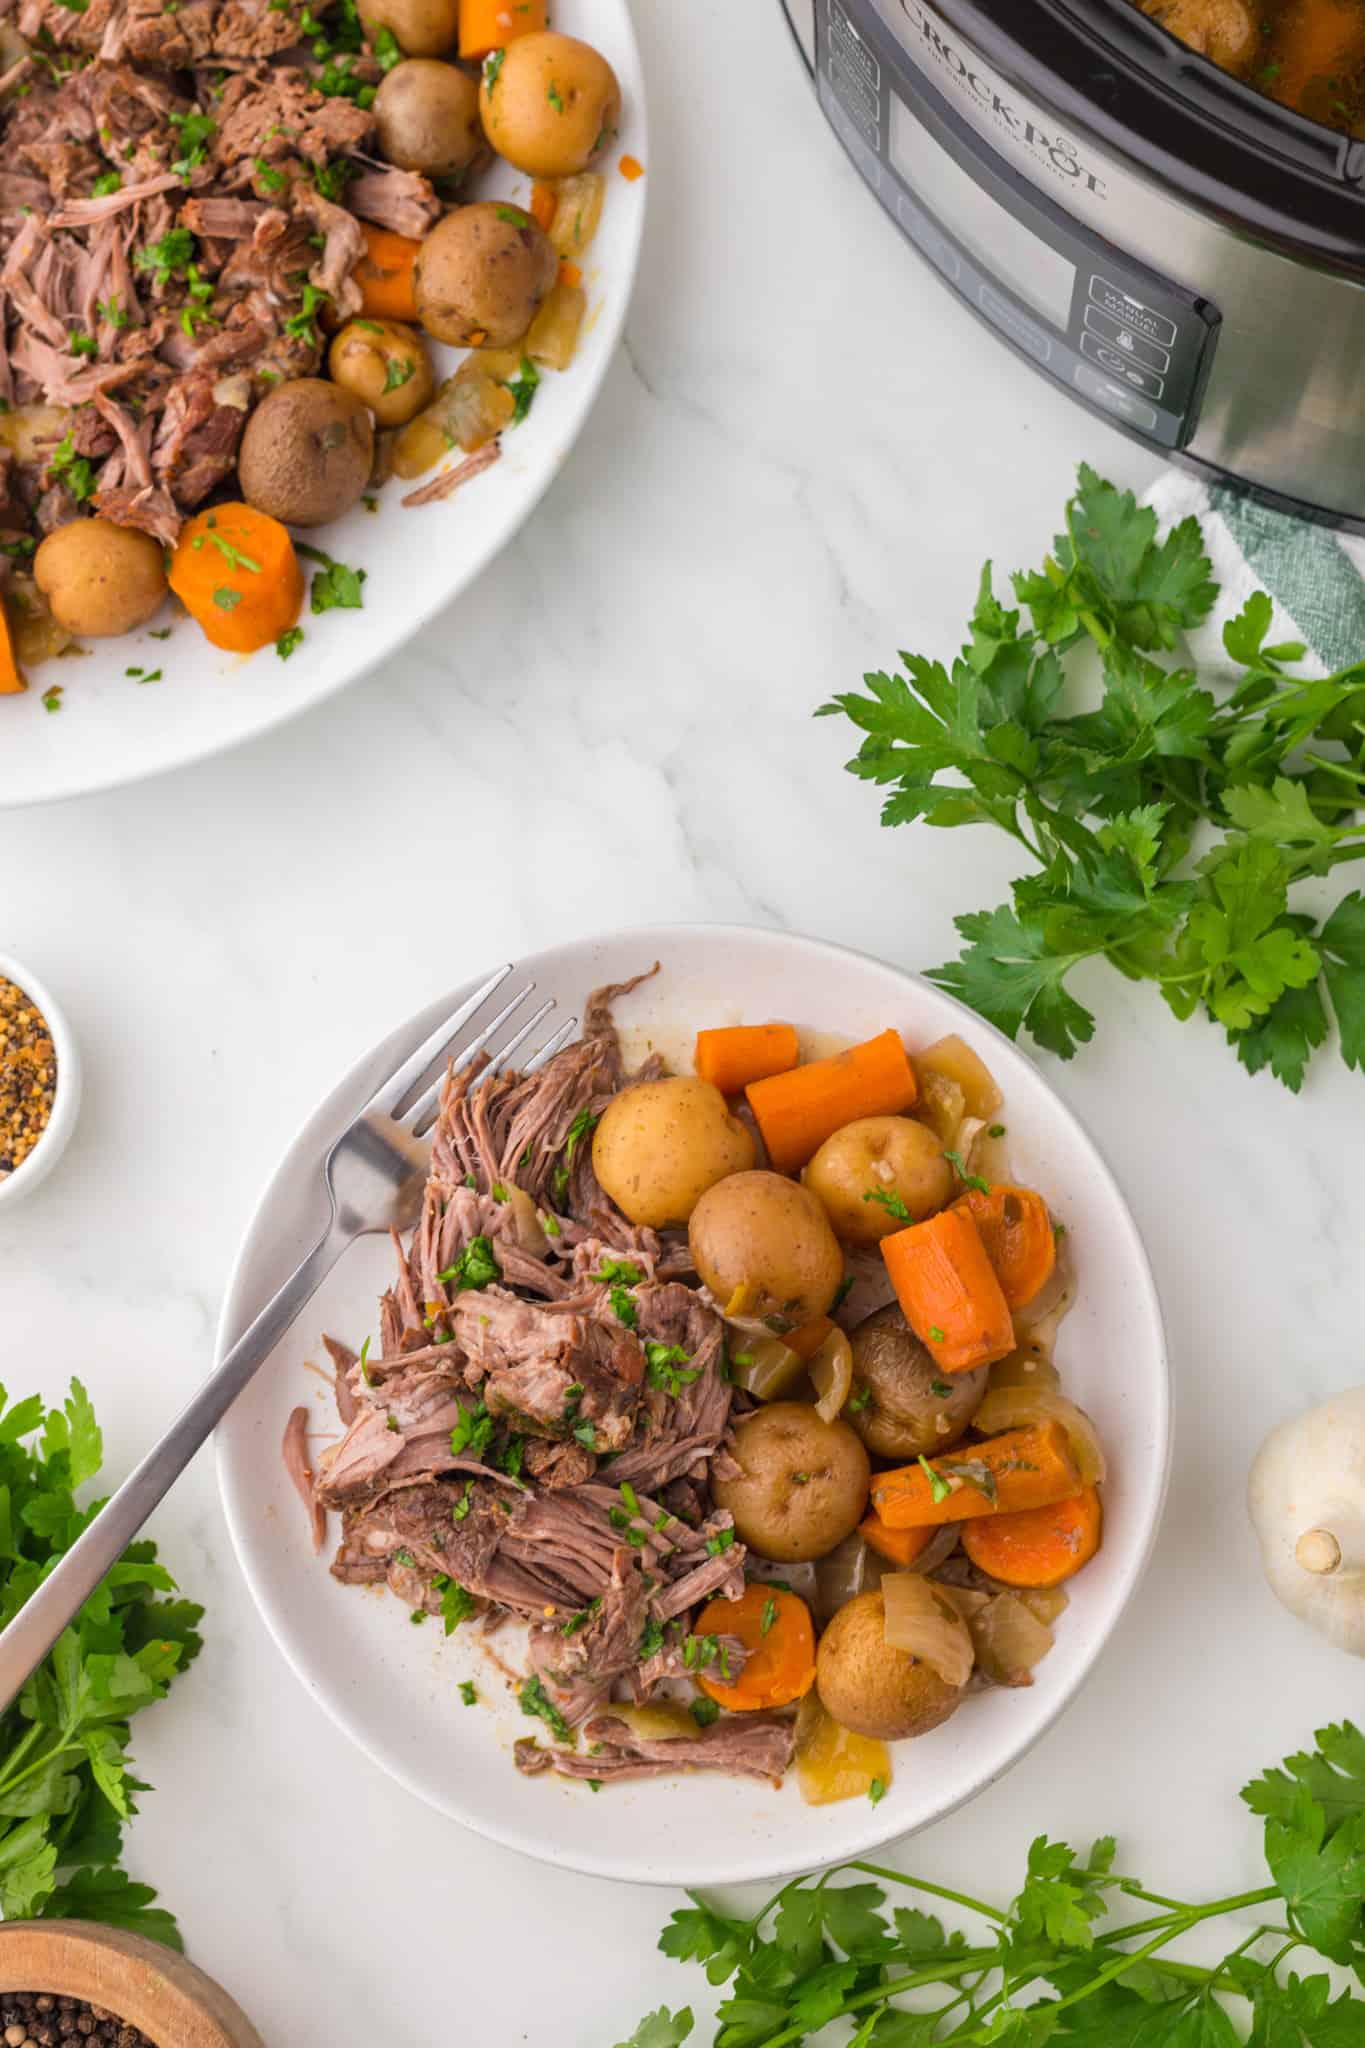 Crock Pot Pot Roast is a complete dinner recipe with a delicious tender beef roast, carrots and baby potatoes all cooked together in the slow cooker.